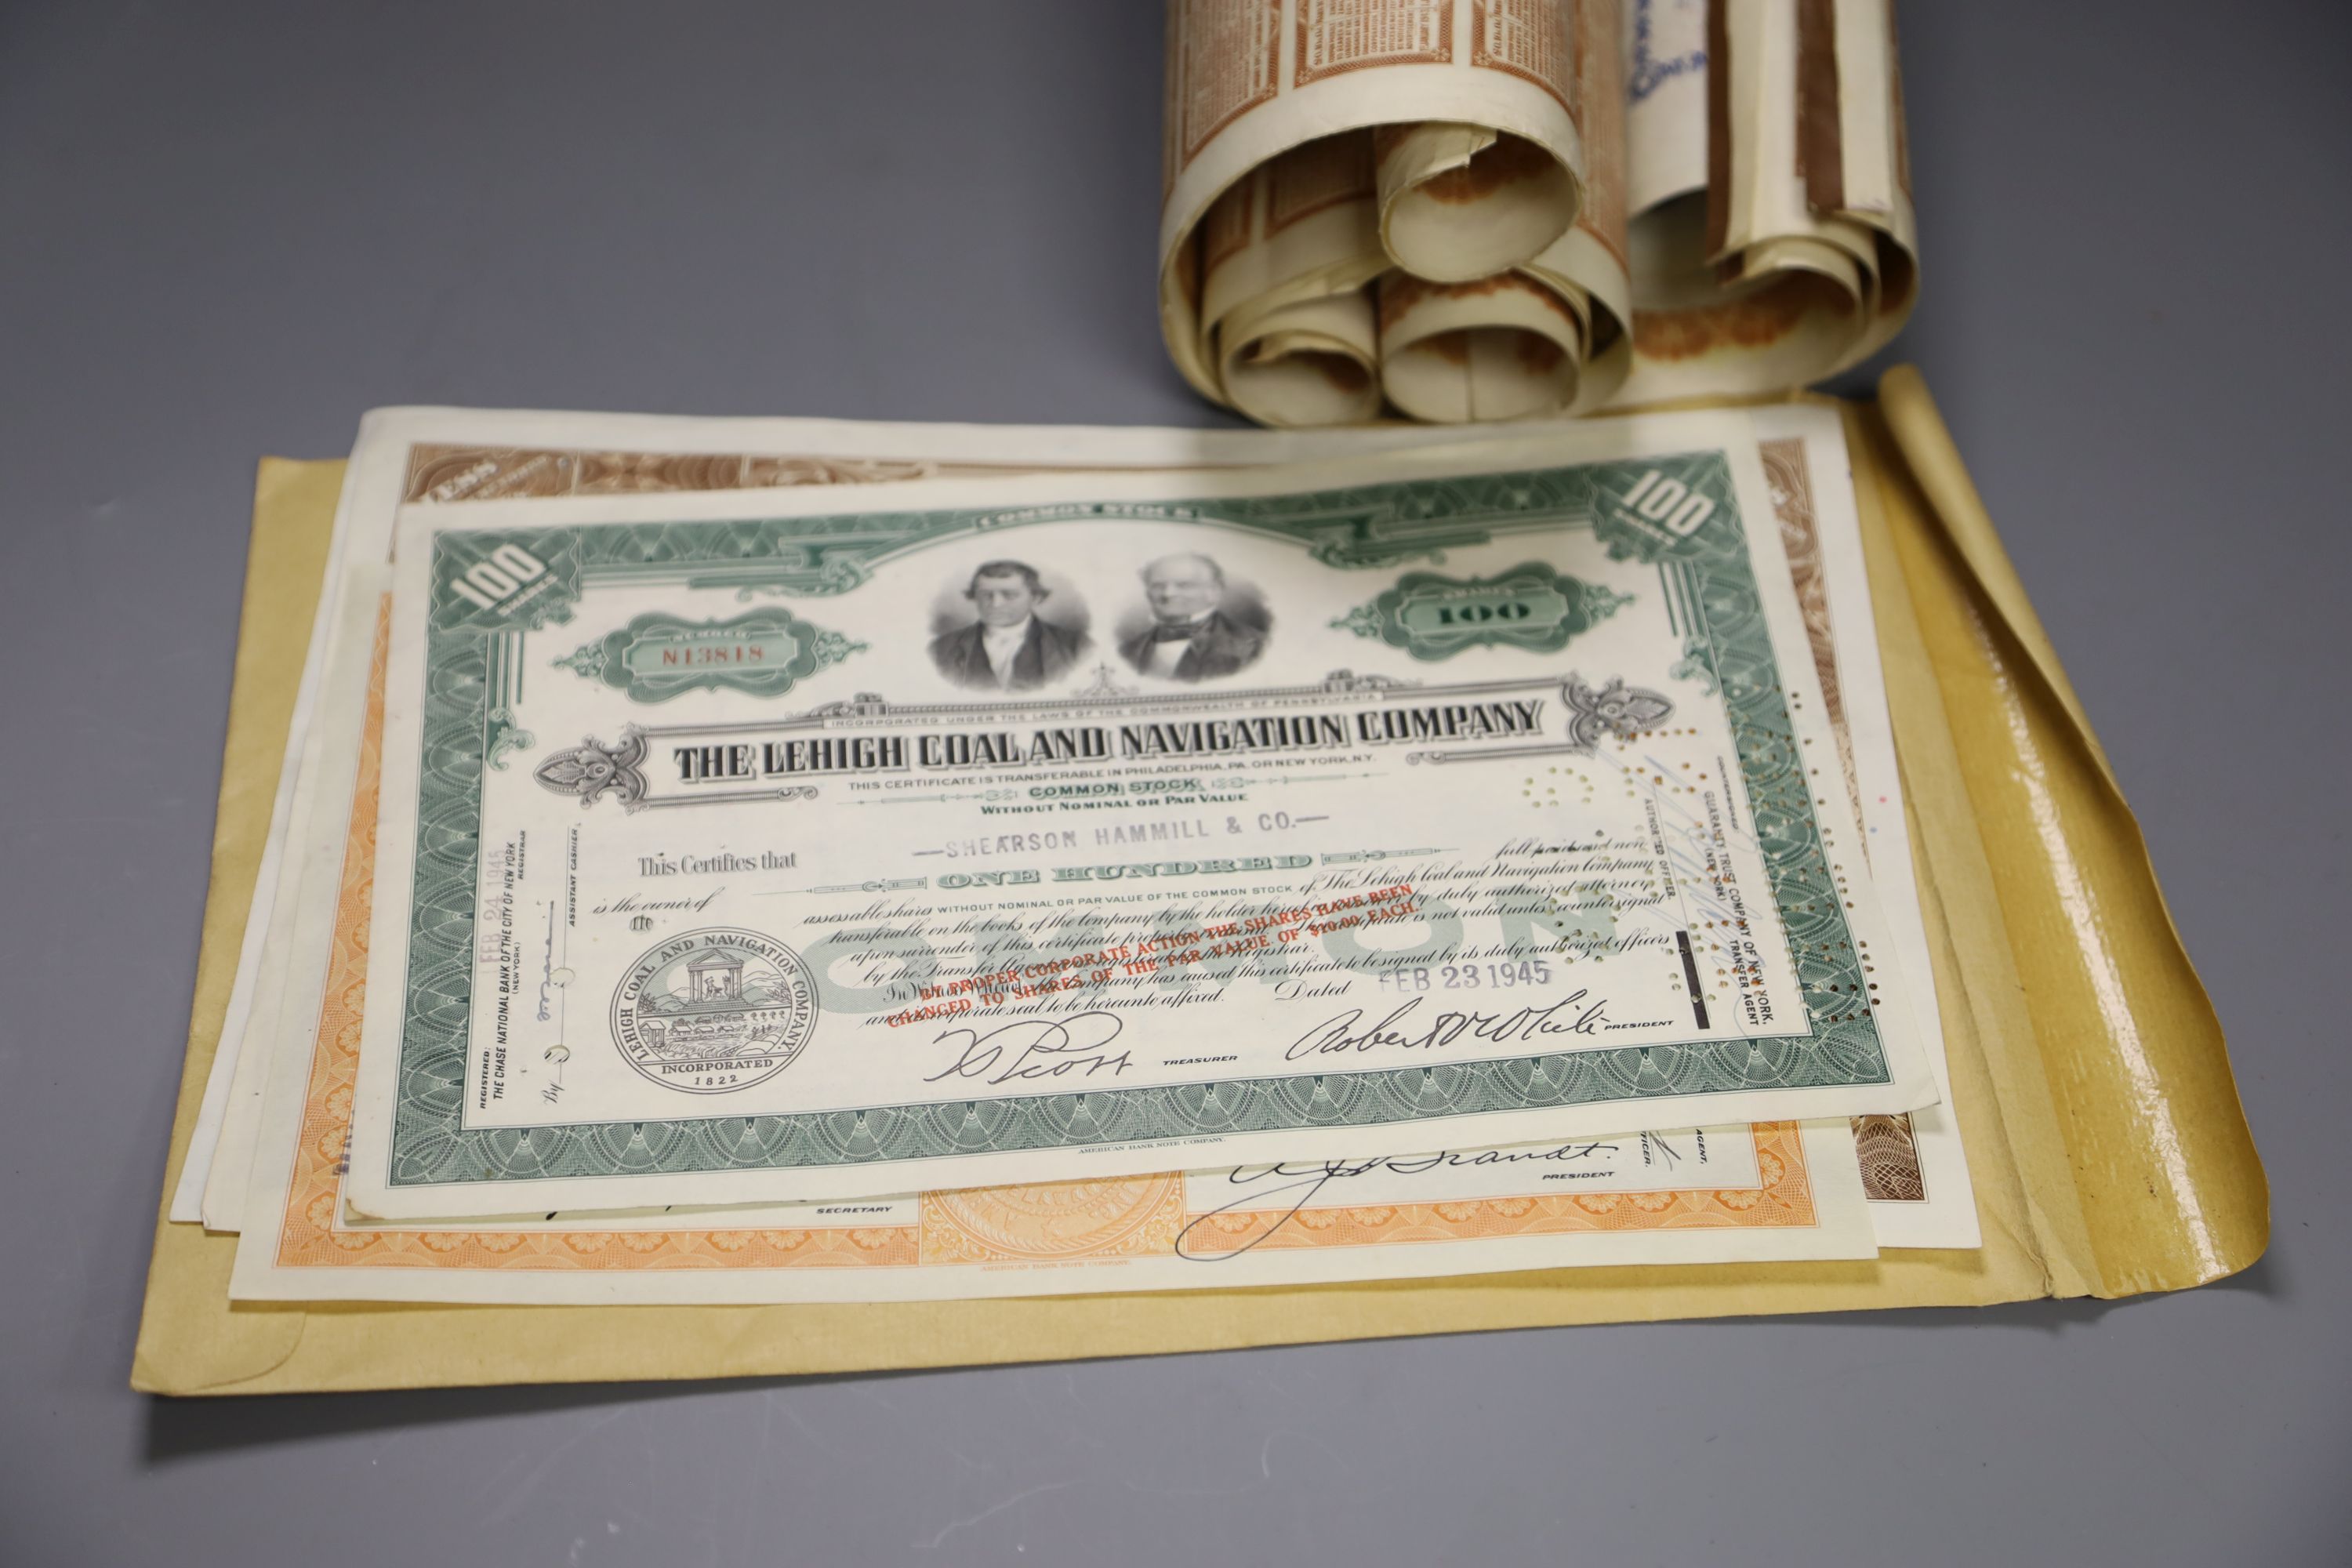 Eight Chinese bond certificates and 4 American bond certificates